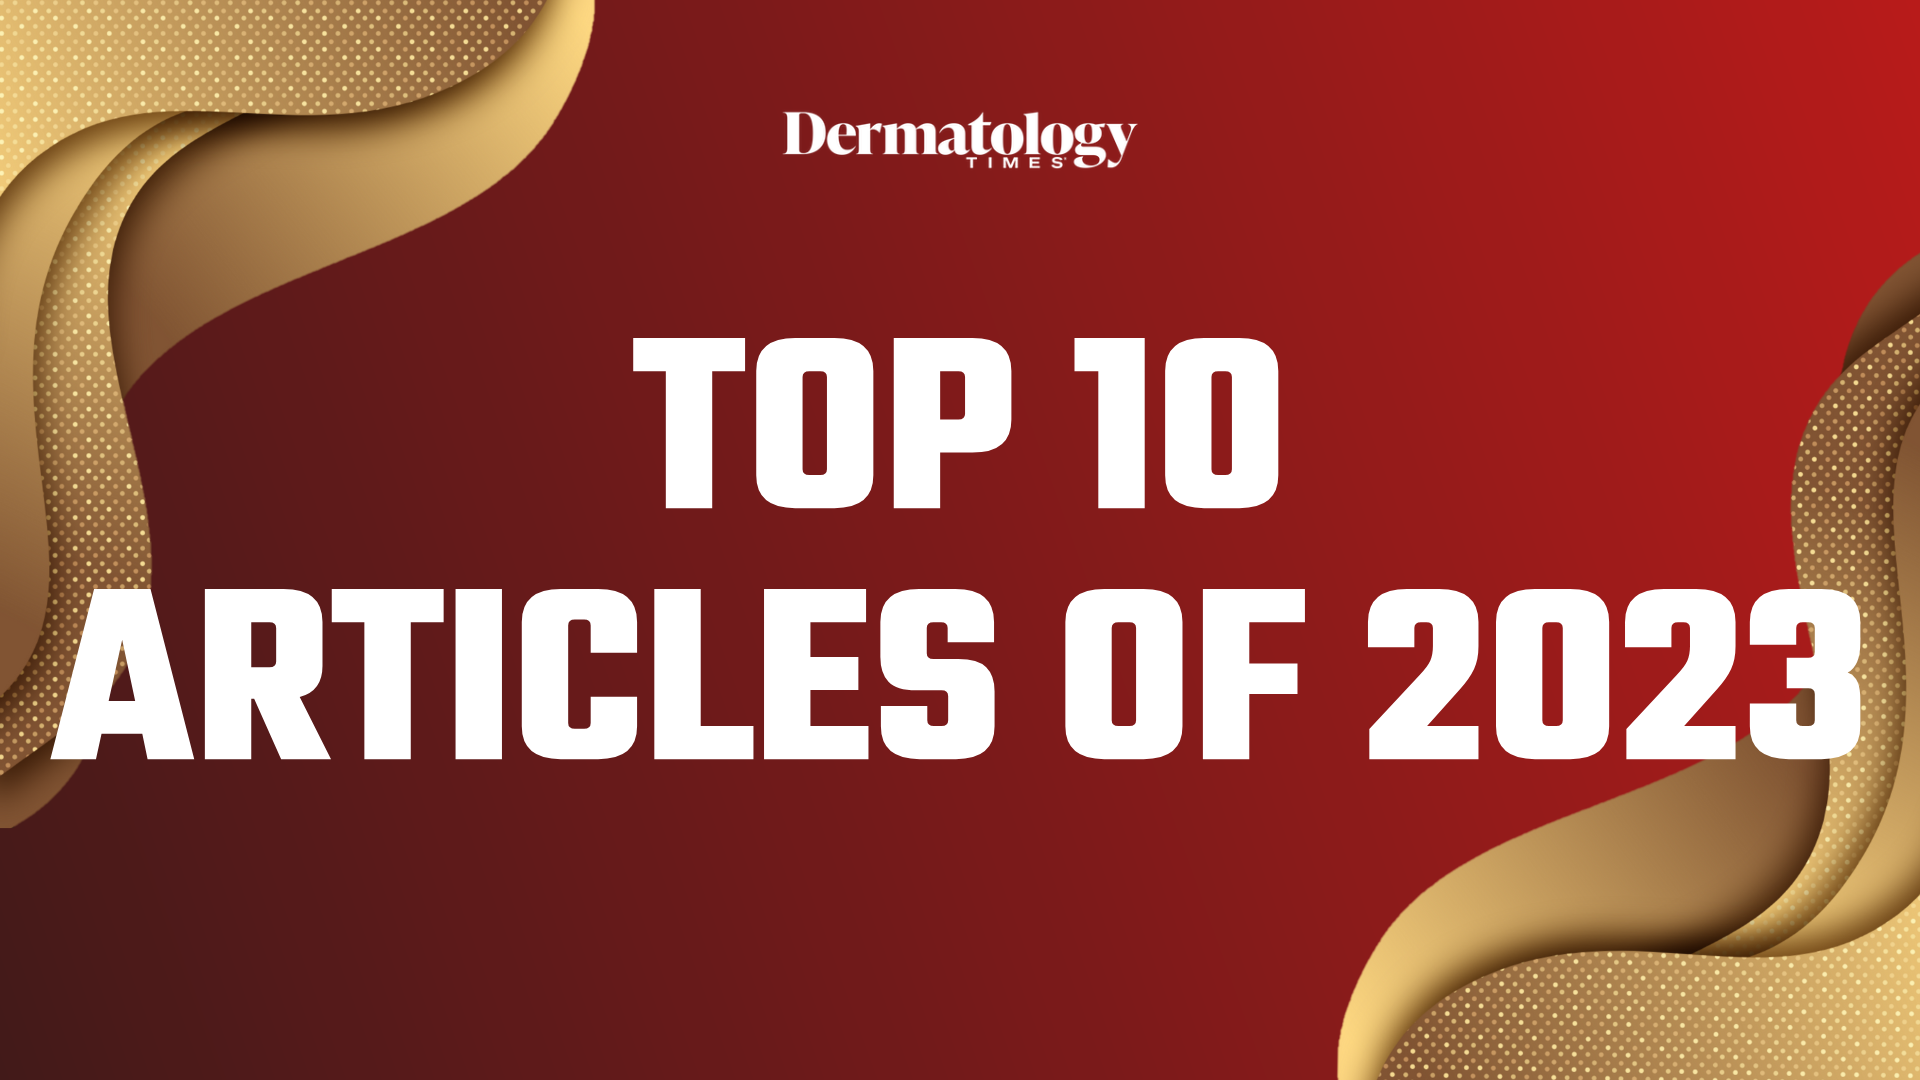 Top 10 Dermatology Articles of 2023 